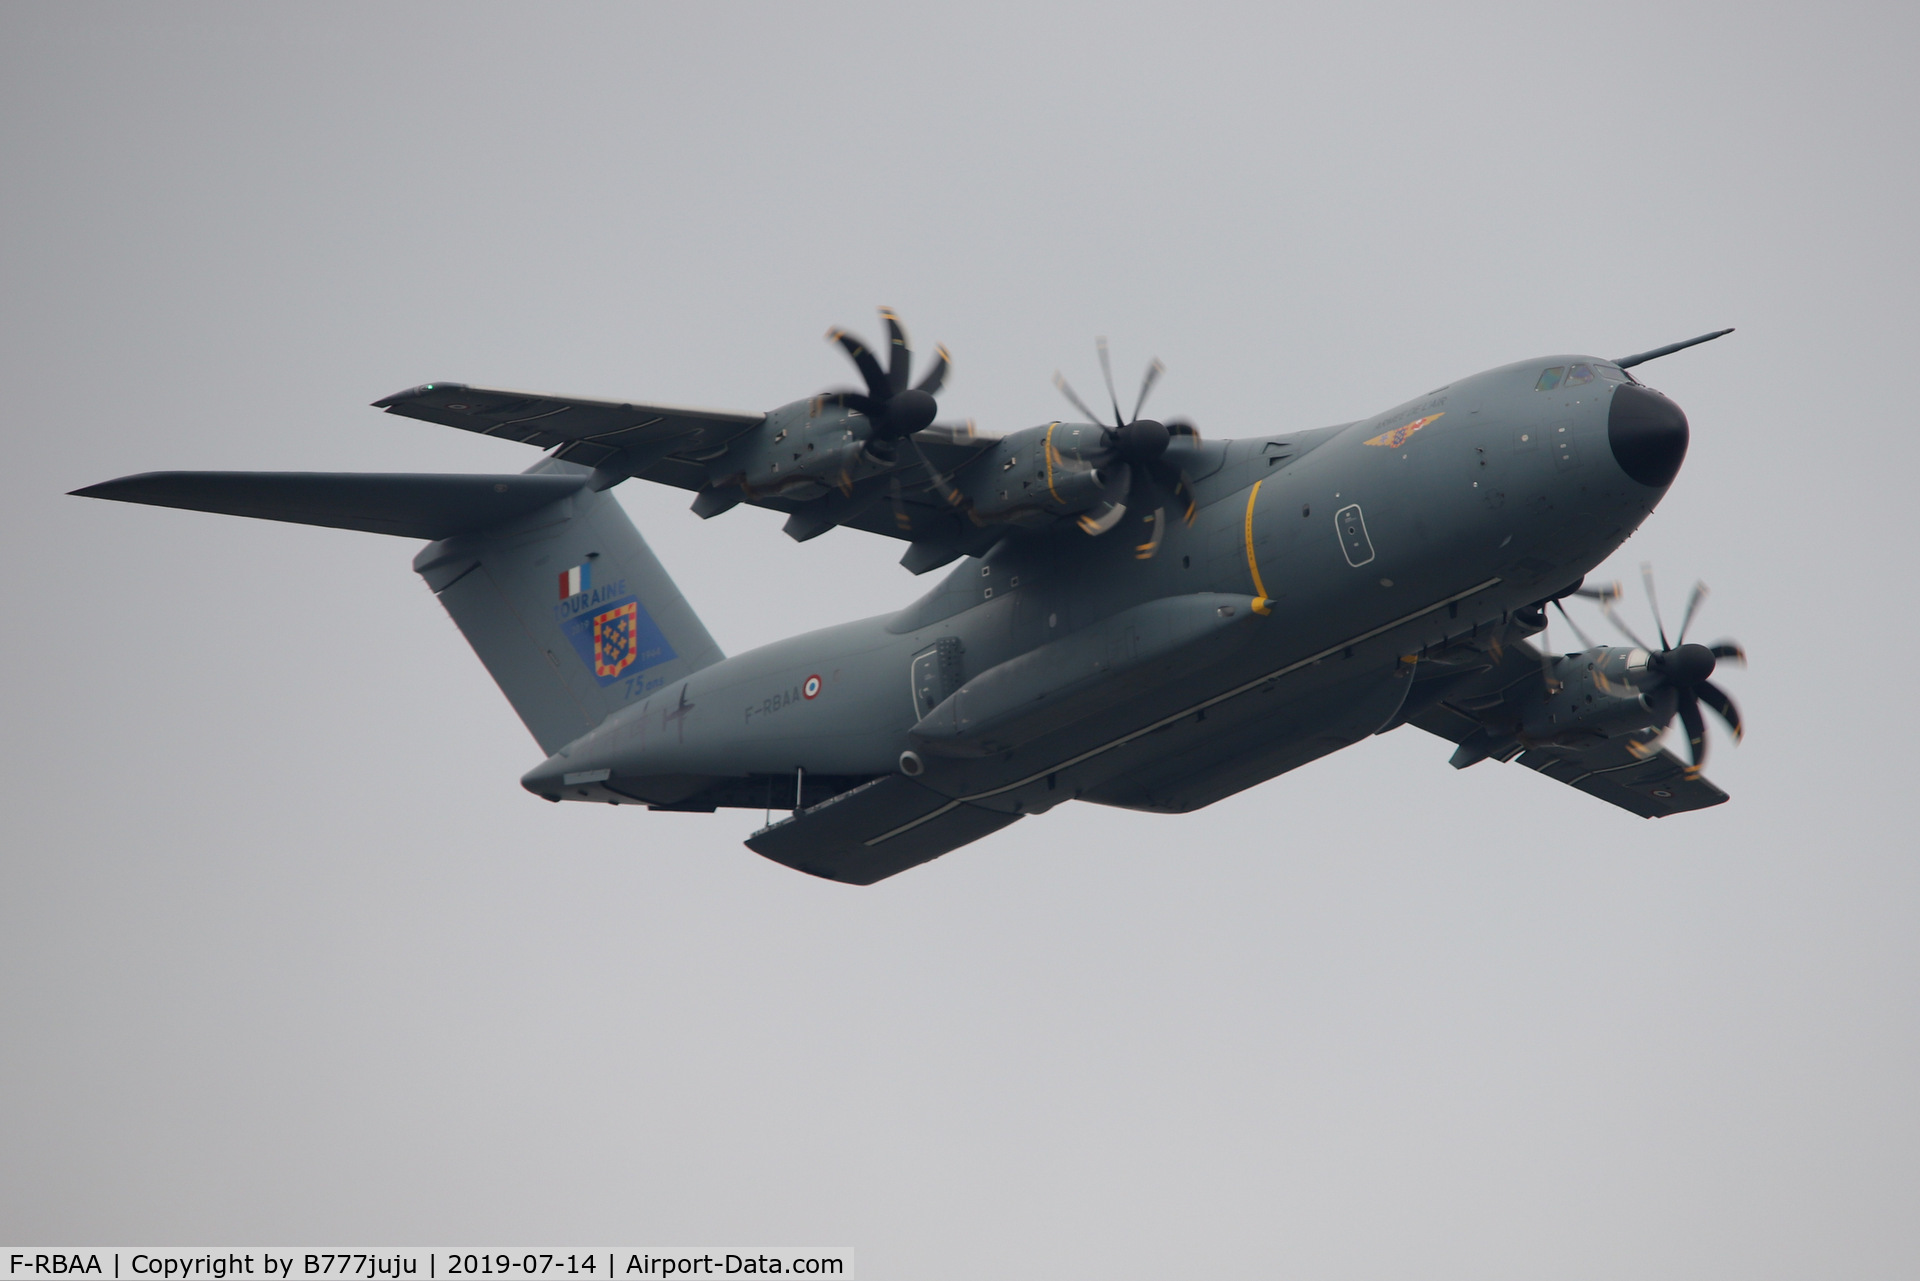 F-RBAA, 2013 Airbus A400M Atlas C/N 007, during French Parade over Paris